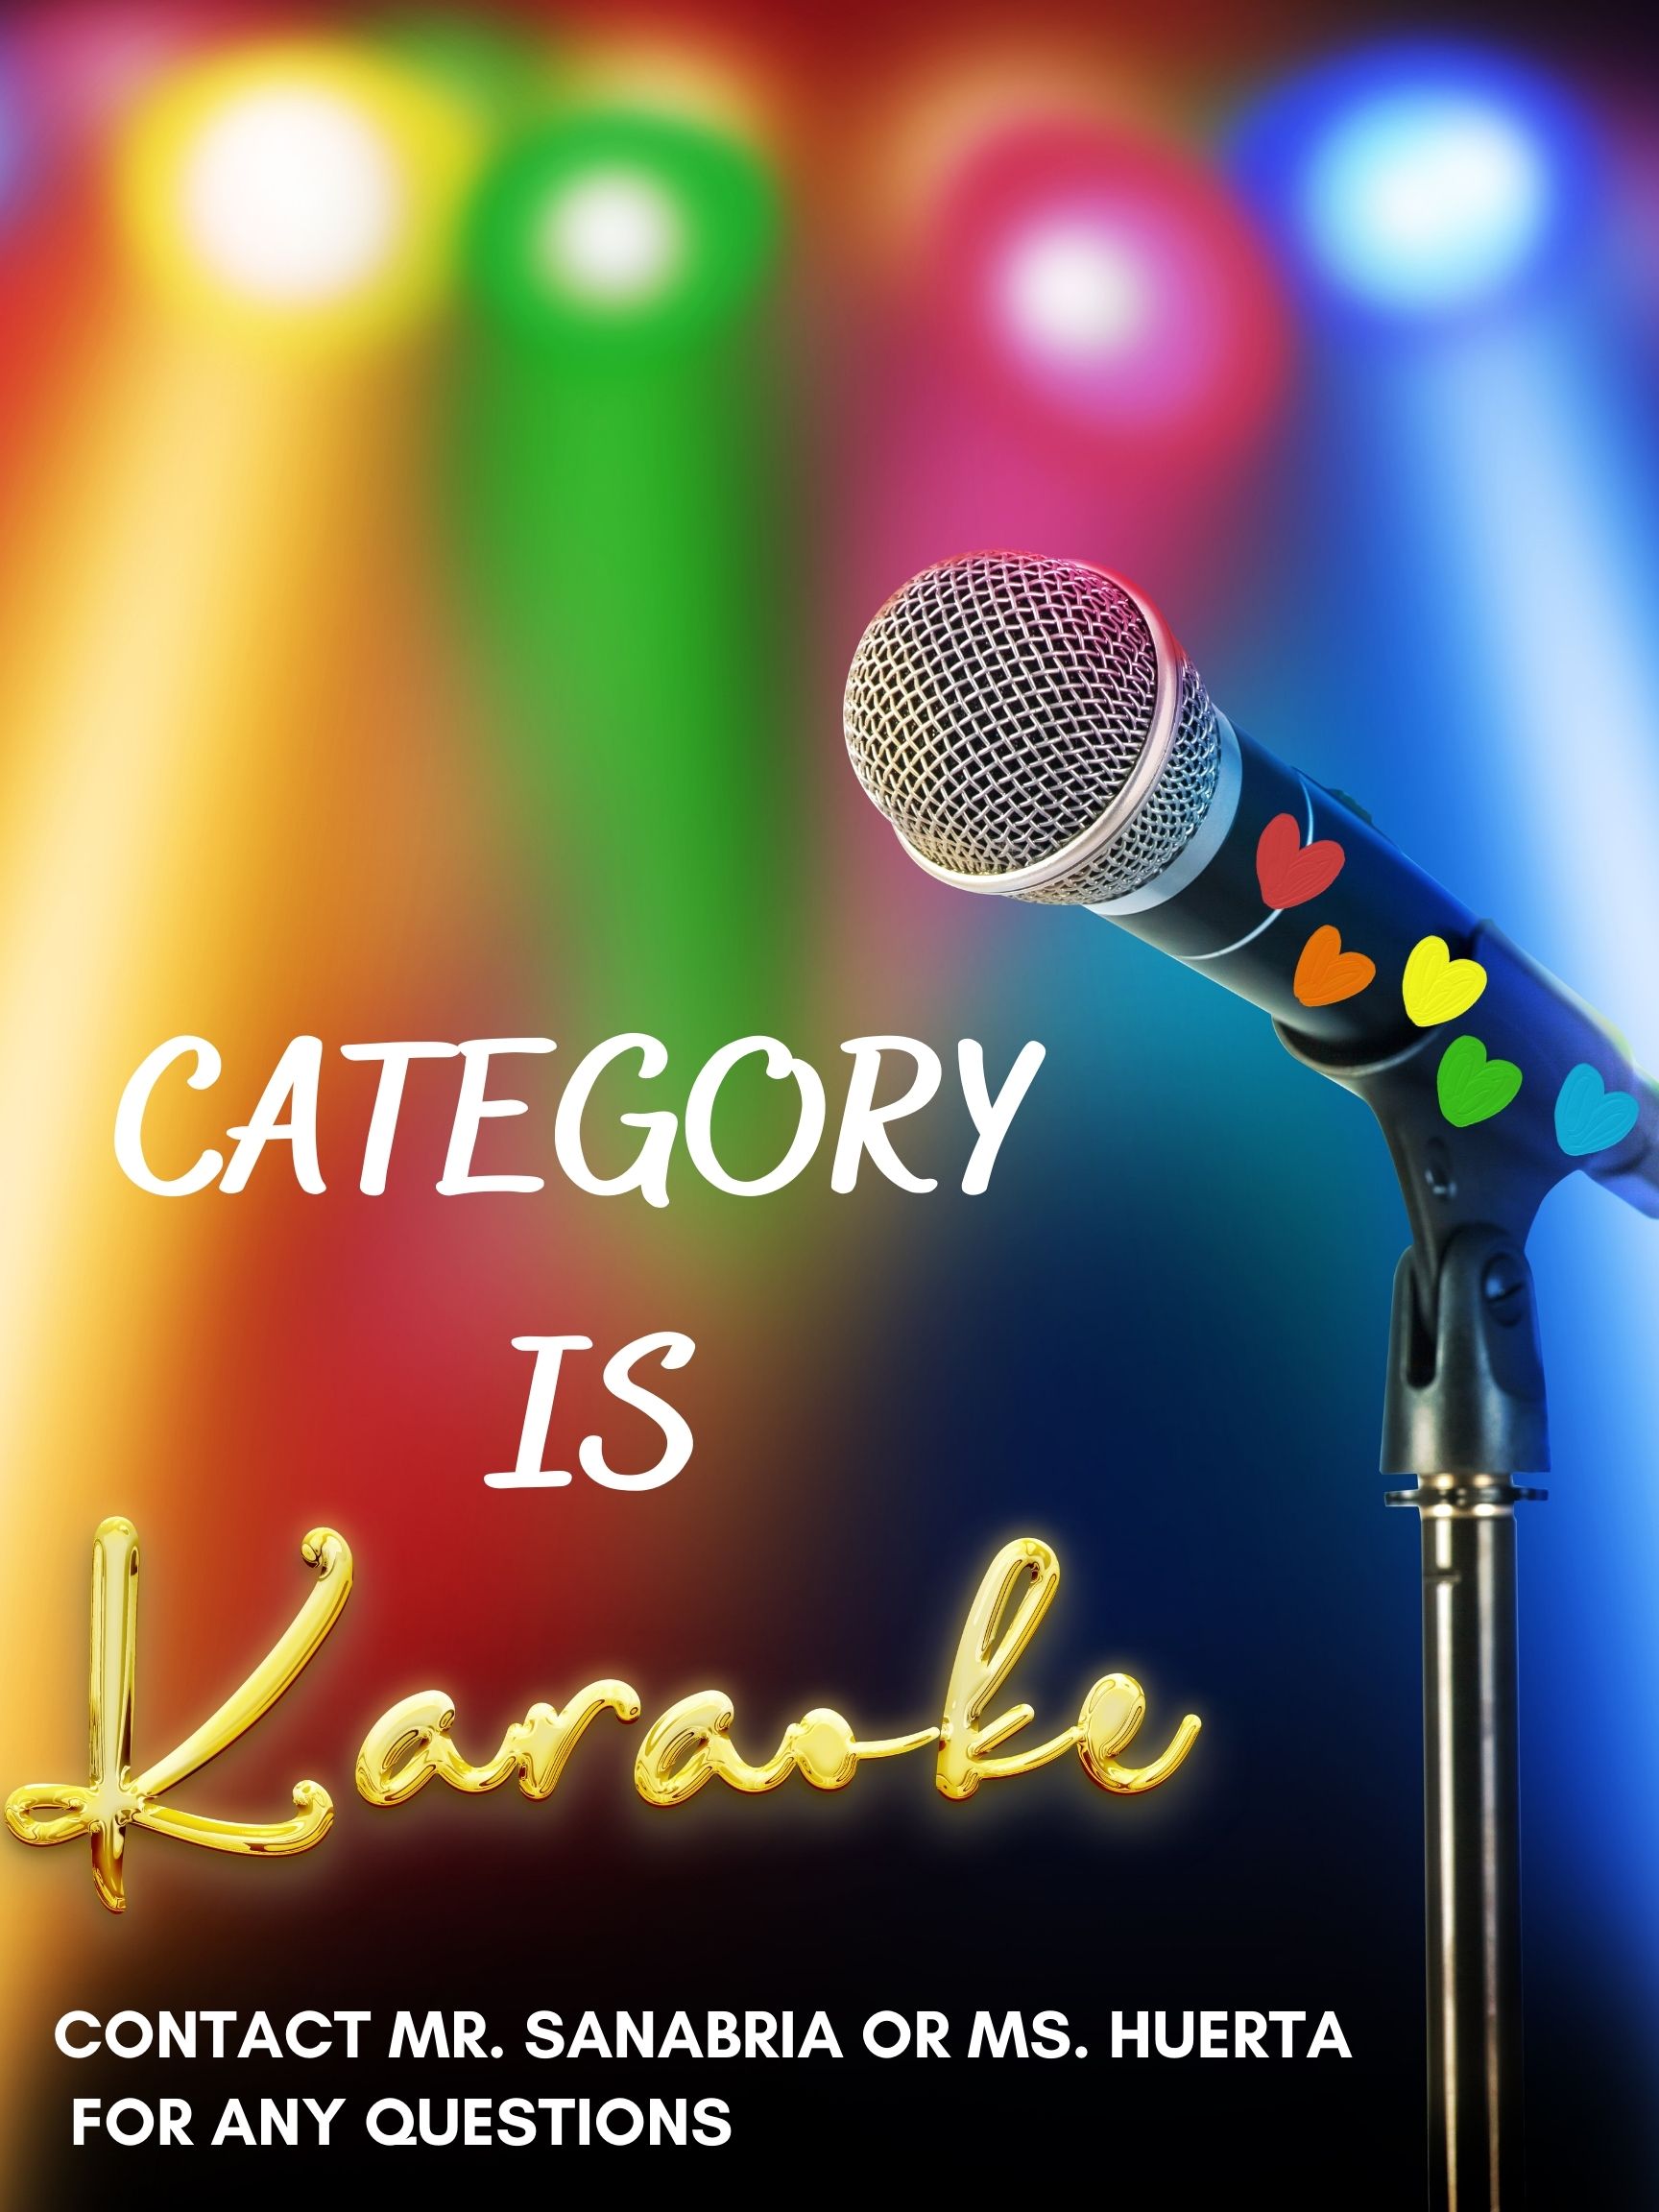 The graphic is a poster for a ITW David Speer Academy Pride and Allies Club event. The title is in the bottom left in big text that reads "Category is Karaoke". To the right of it is a microphone with rainbow hearts on it. Underneath the title is a short sentence that reads "Contact Mr. Sanabria or Ms. Huerta for any questions". The background of the graphic is rainbow stage lights.